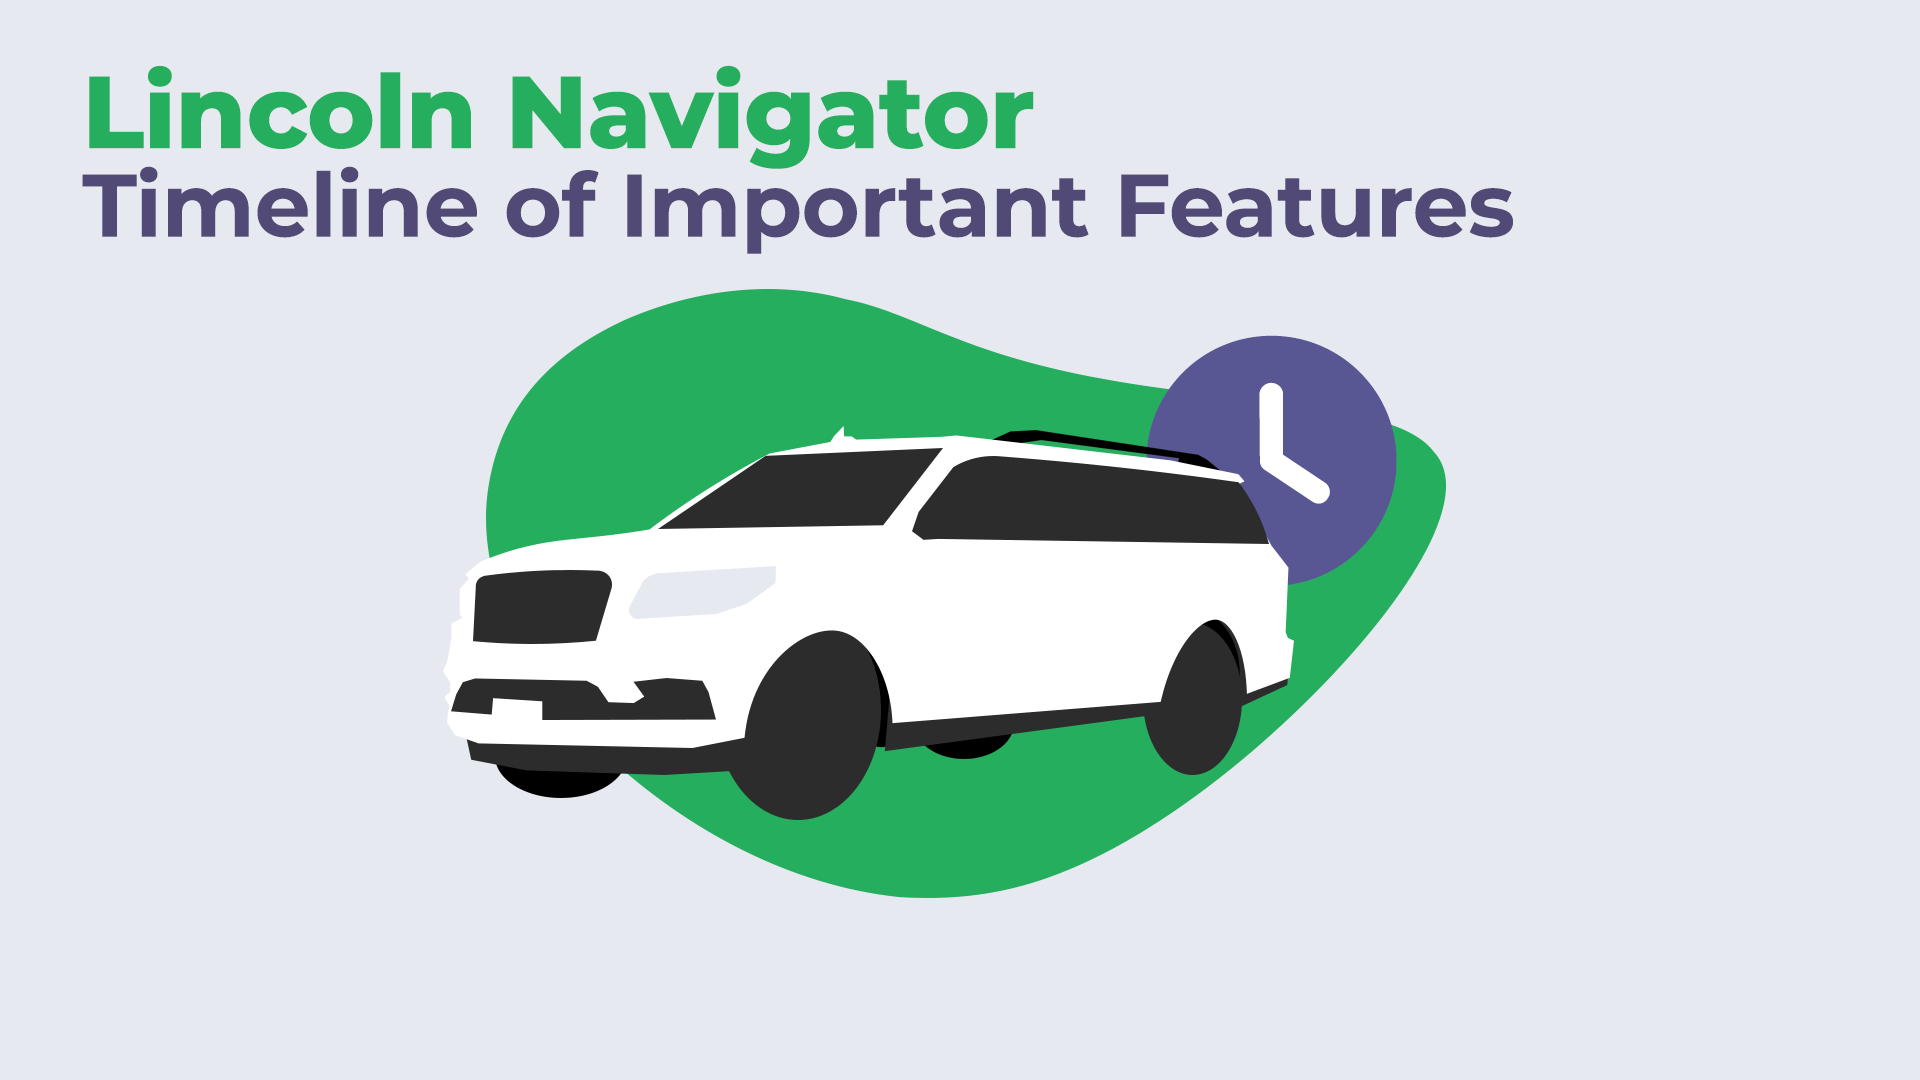 Lincoln Navigator's timeline of important features